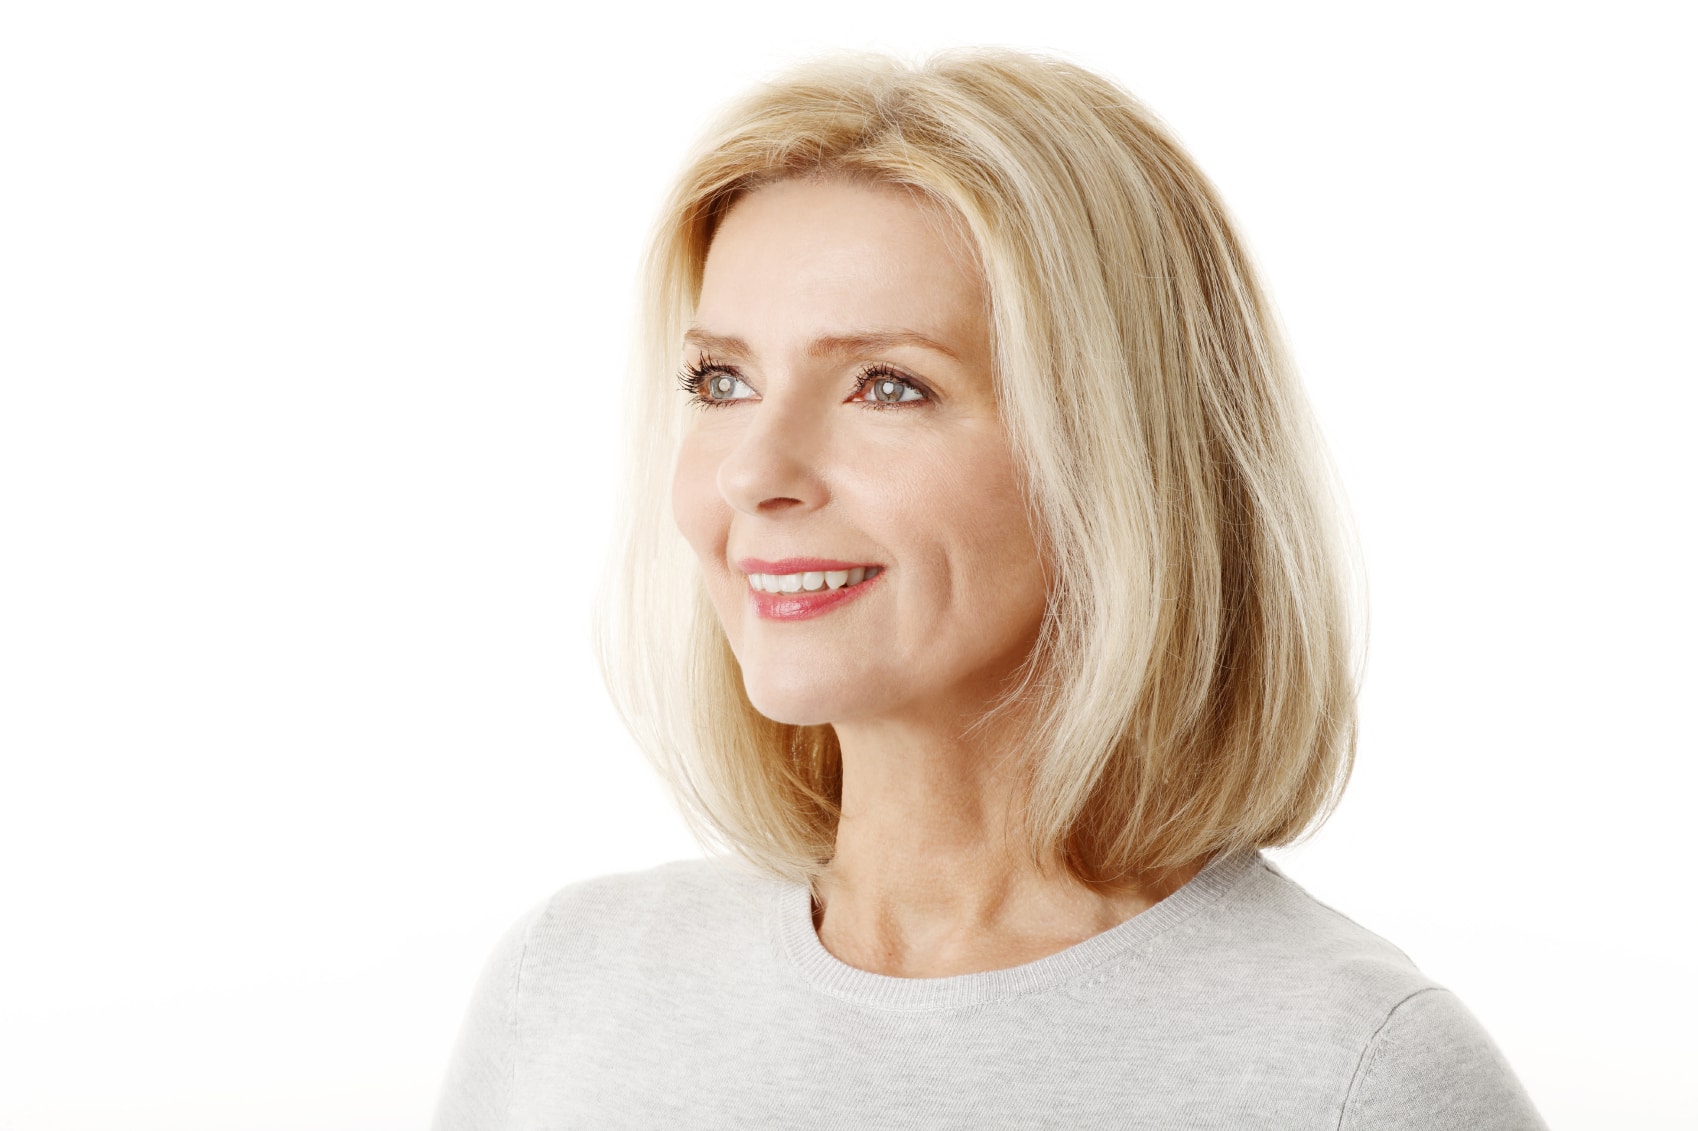 Plastic Surgery On The Elderly: If You're In Good Health, Why Not? Newport Beach, CA